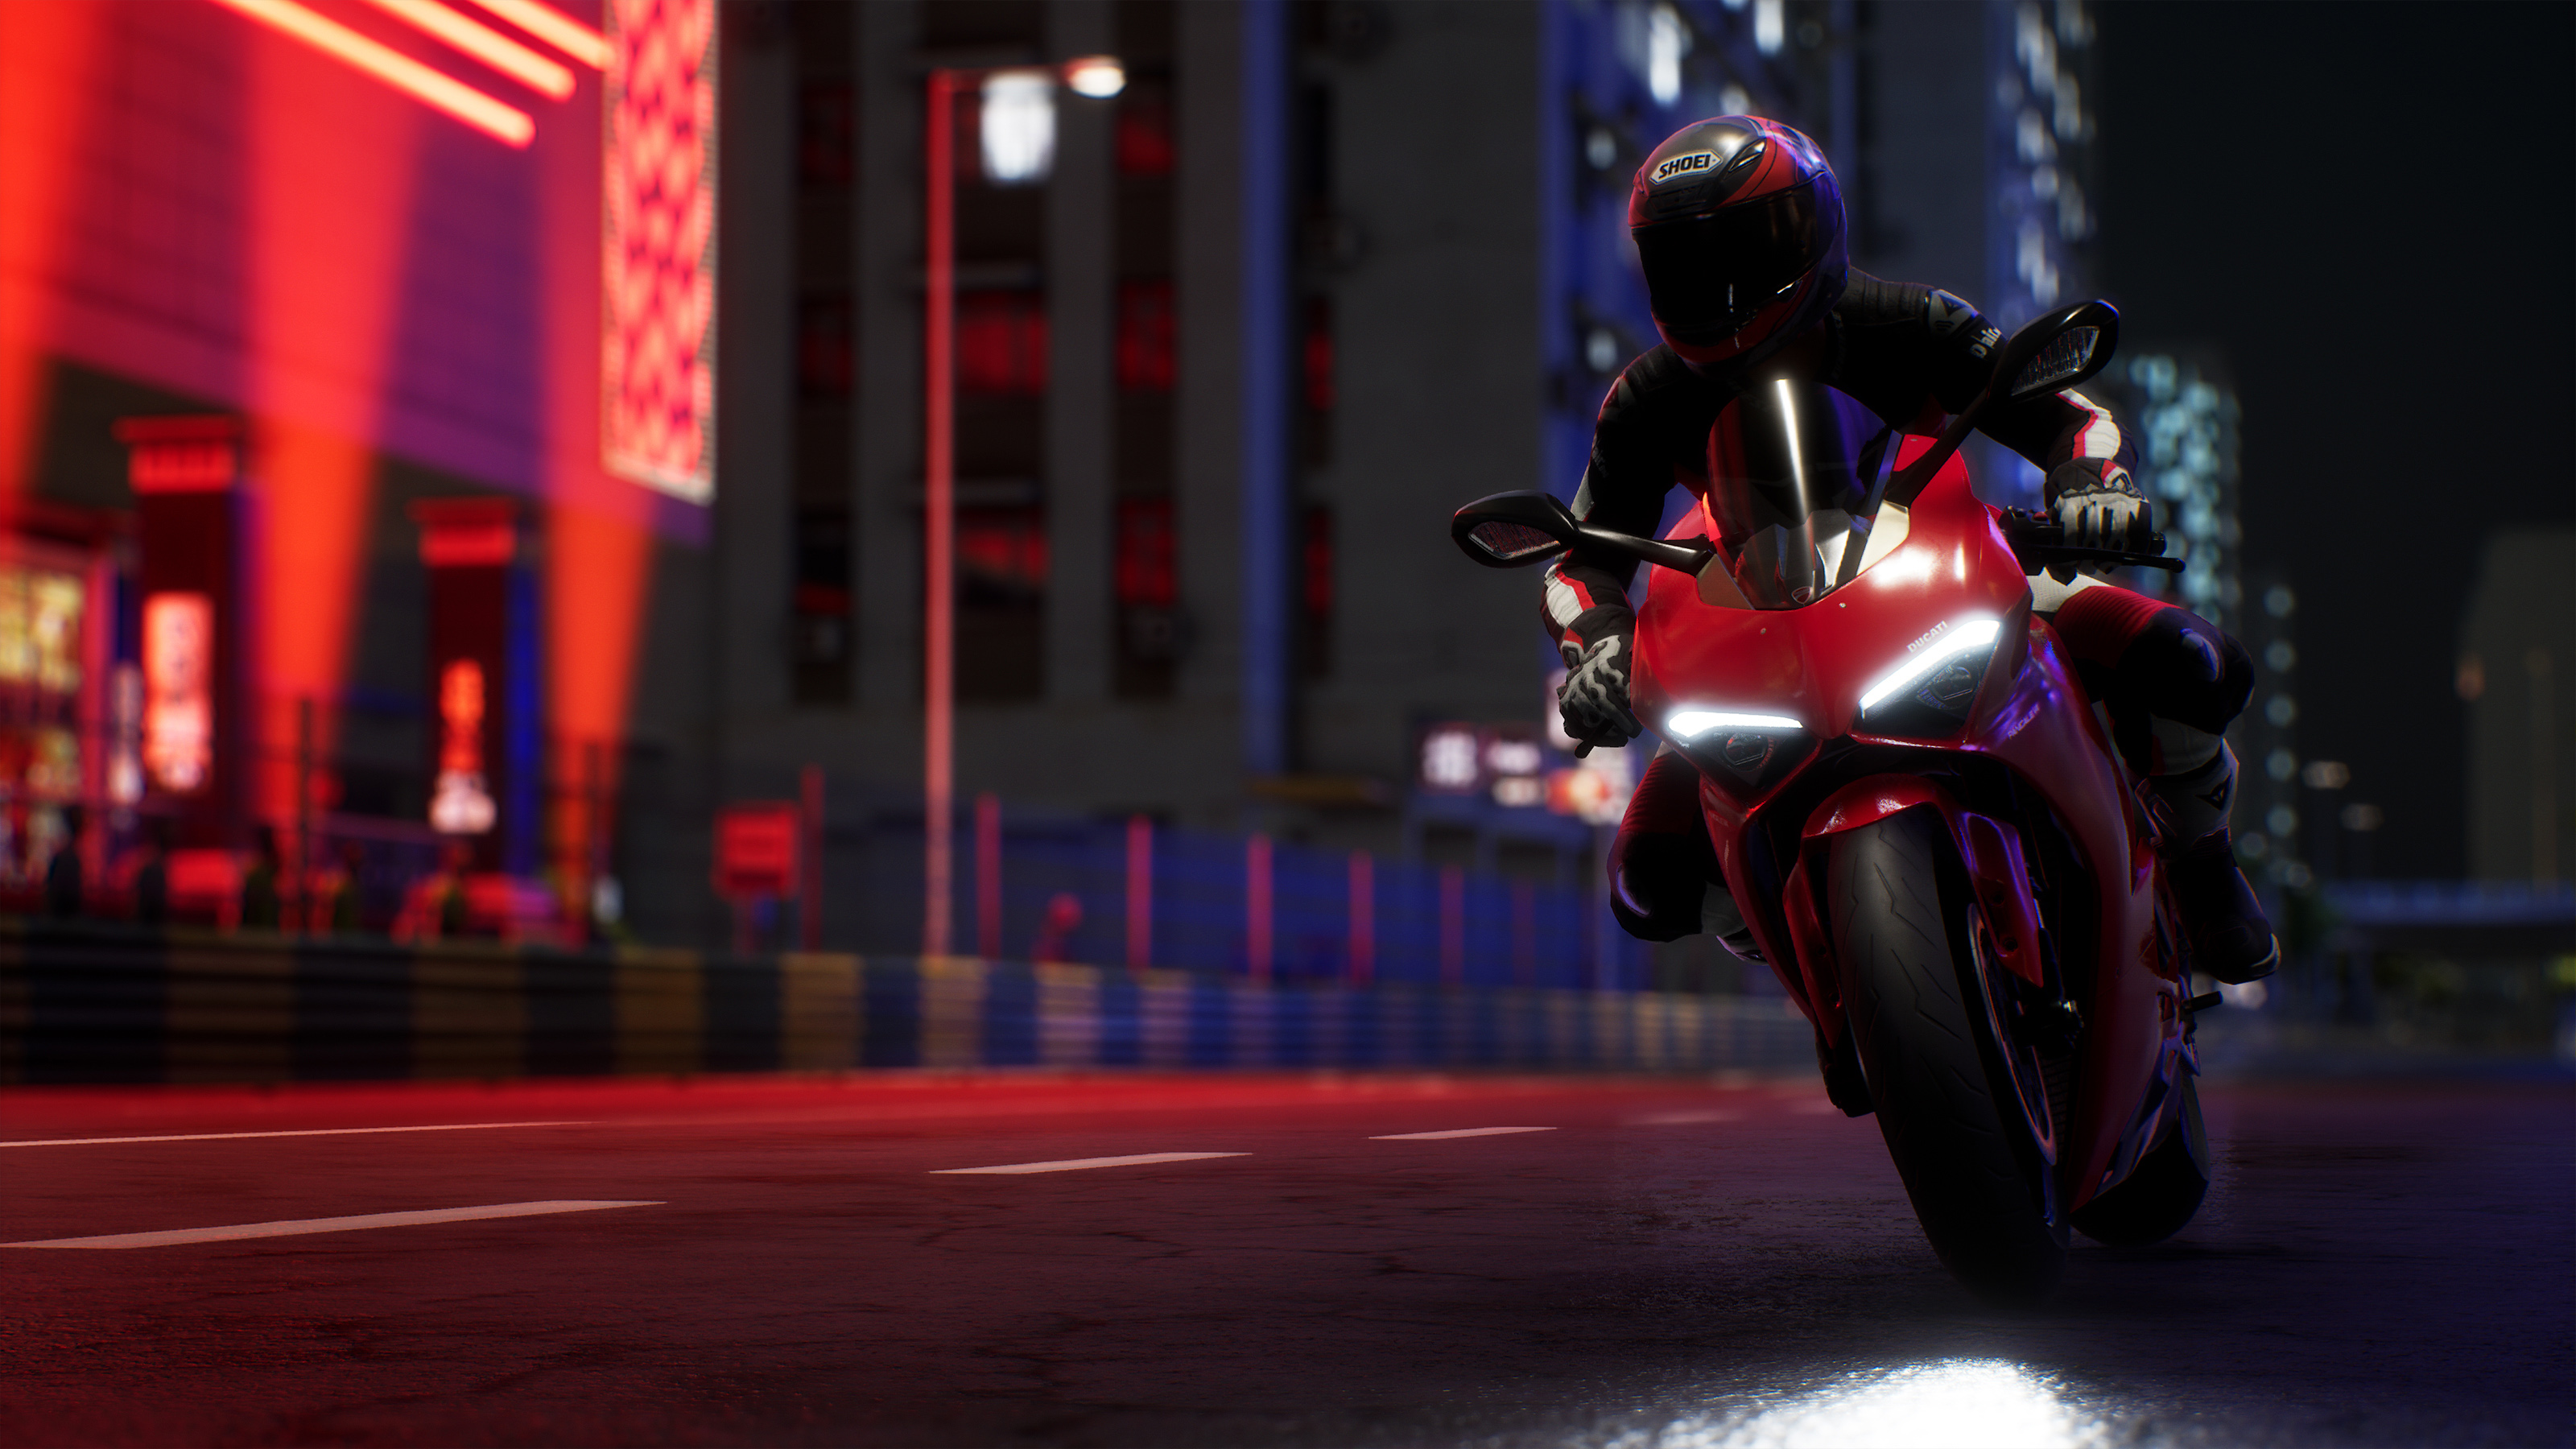 Ride 3 Review